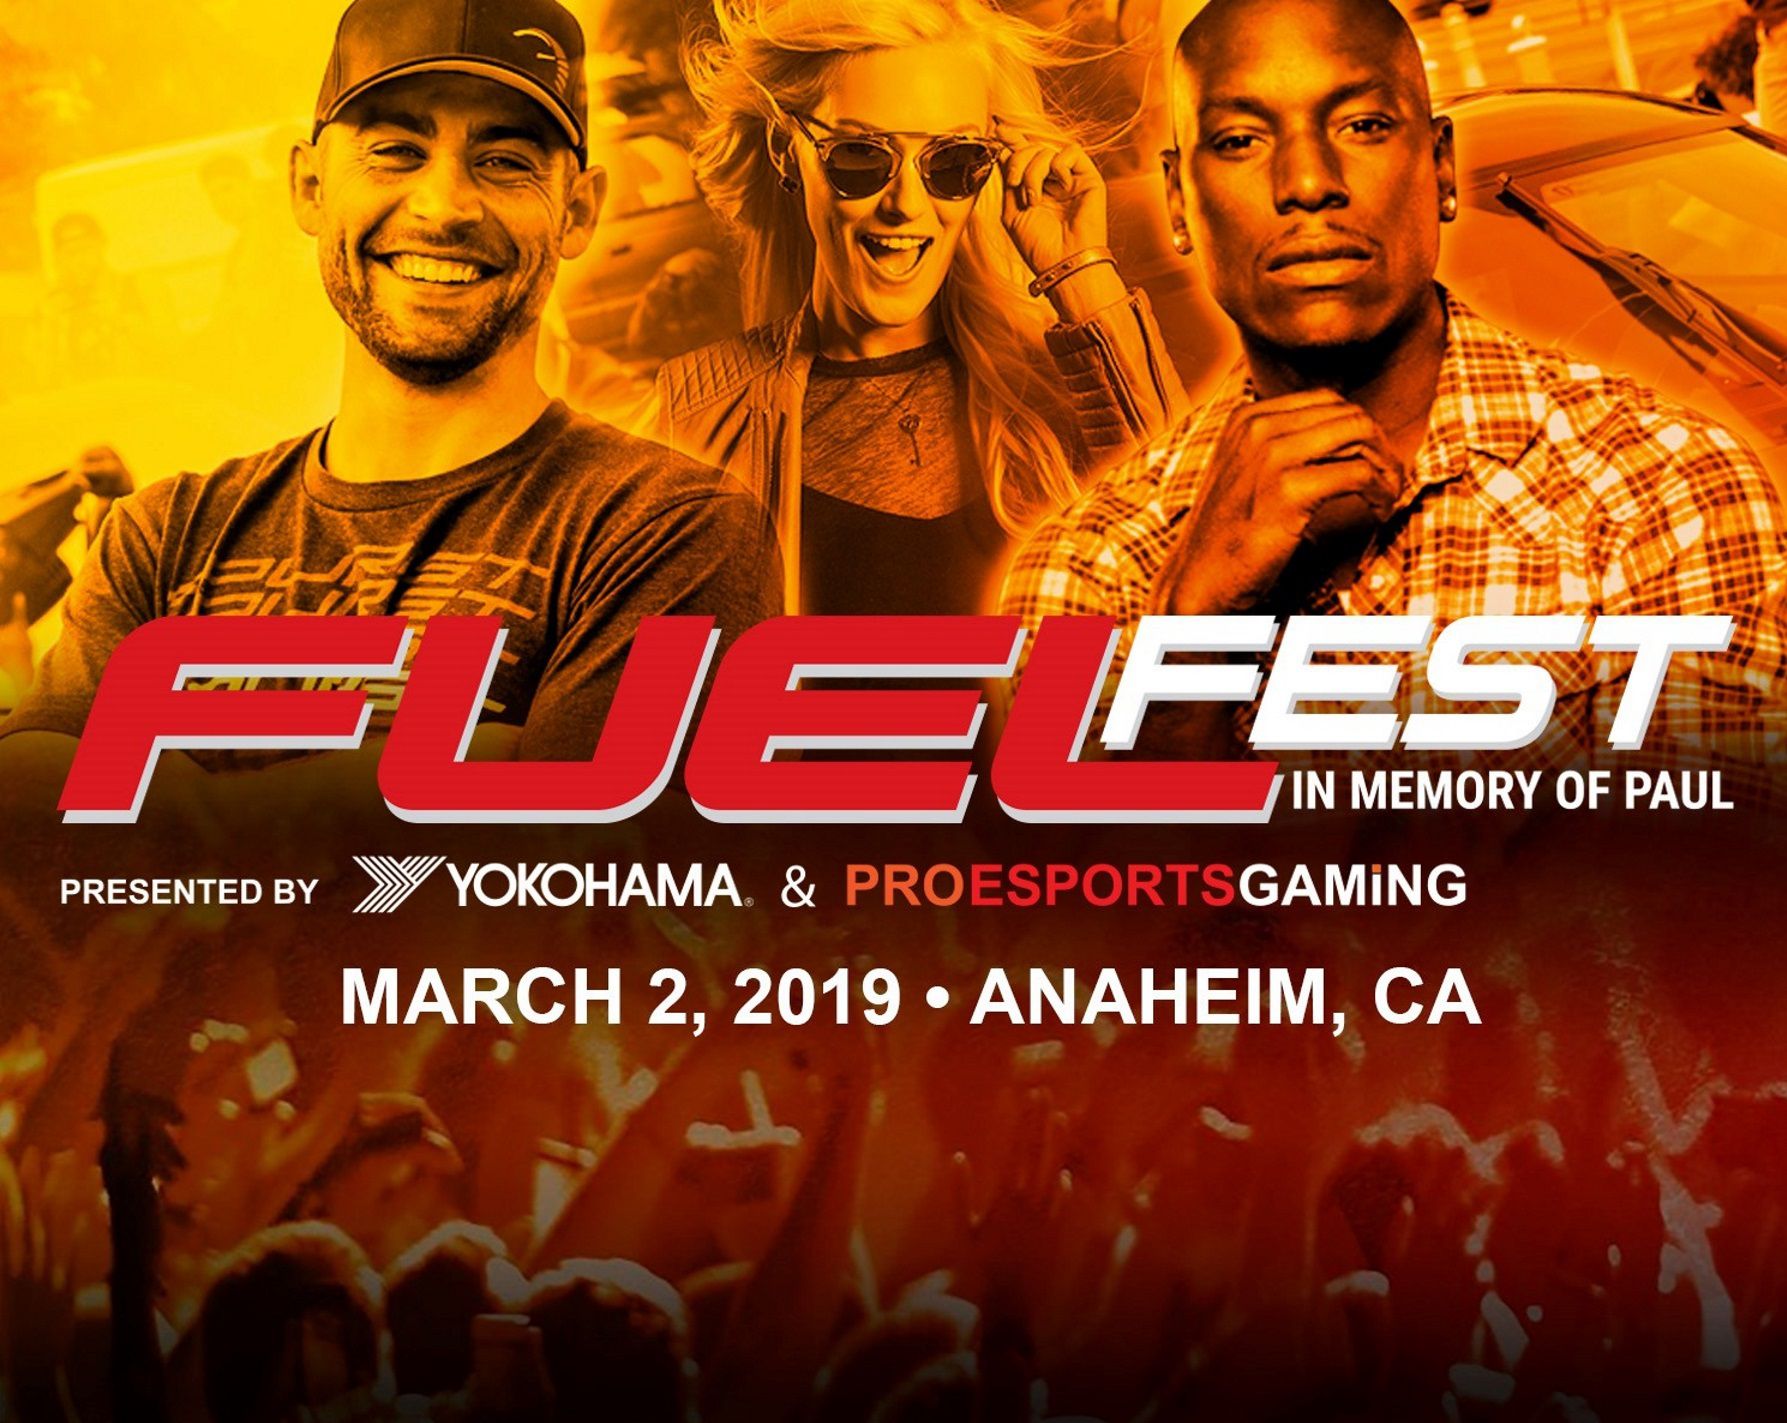 TYRESE AND THE FAMILY OF PAUL WALKER UNITE FOR A FUNDRAISER CALLED THE FUEL FEST IN ANAHEIM CA.  ON MARCH 2ND